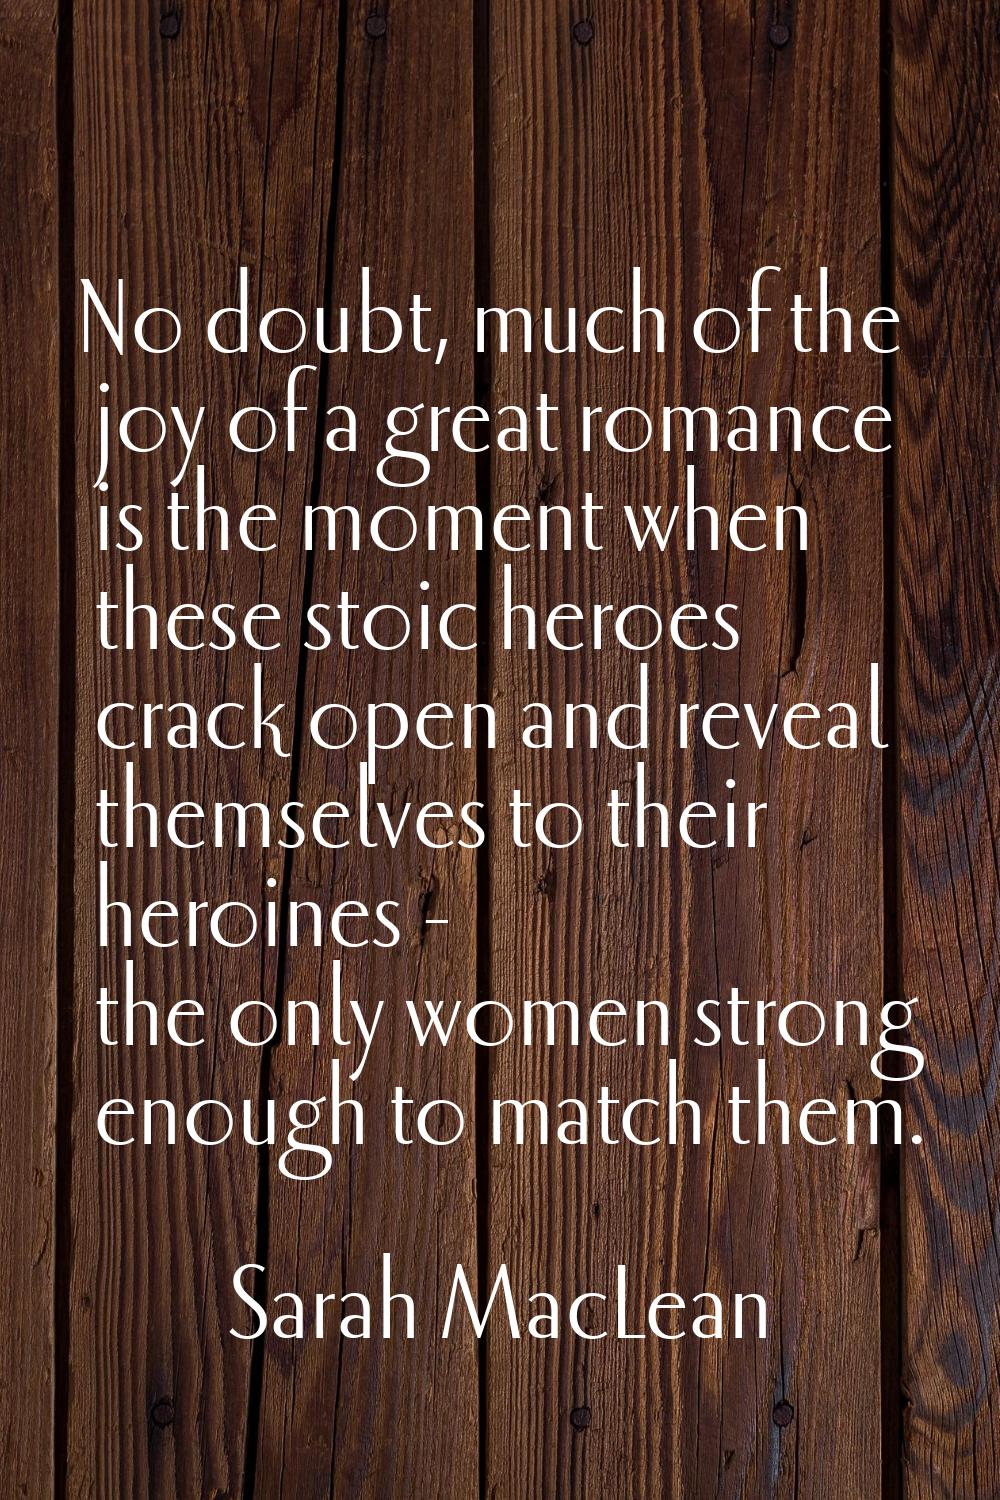 No doubt, much of the joy of a great romance is the moment when these stoic heroes crack open and r